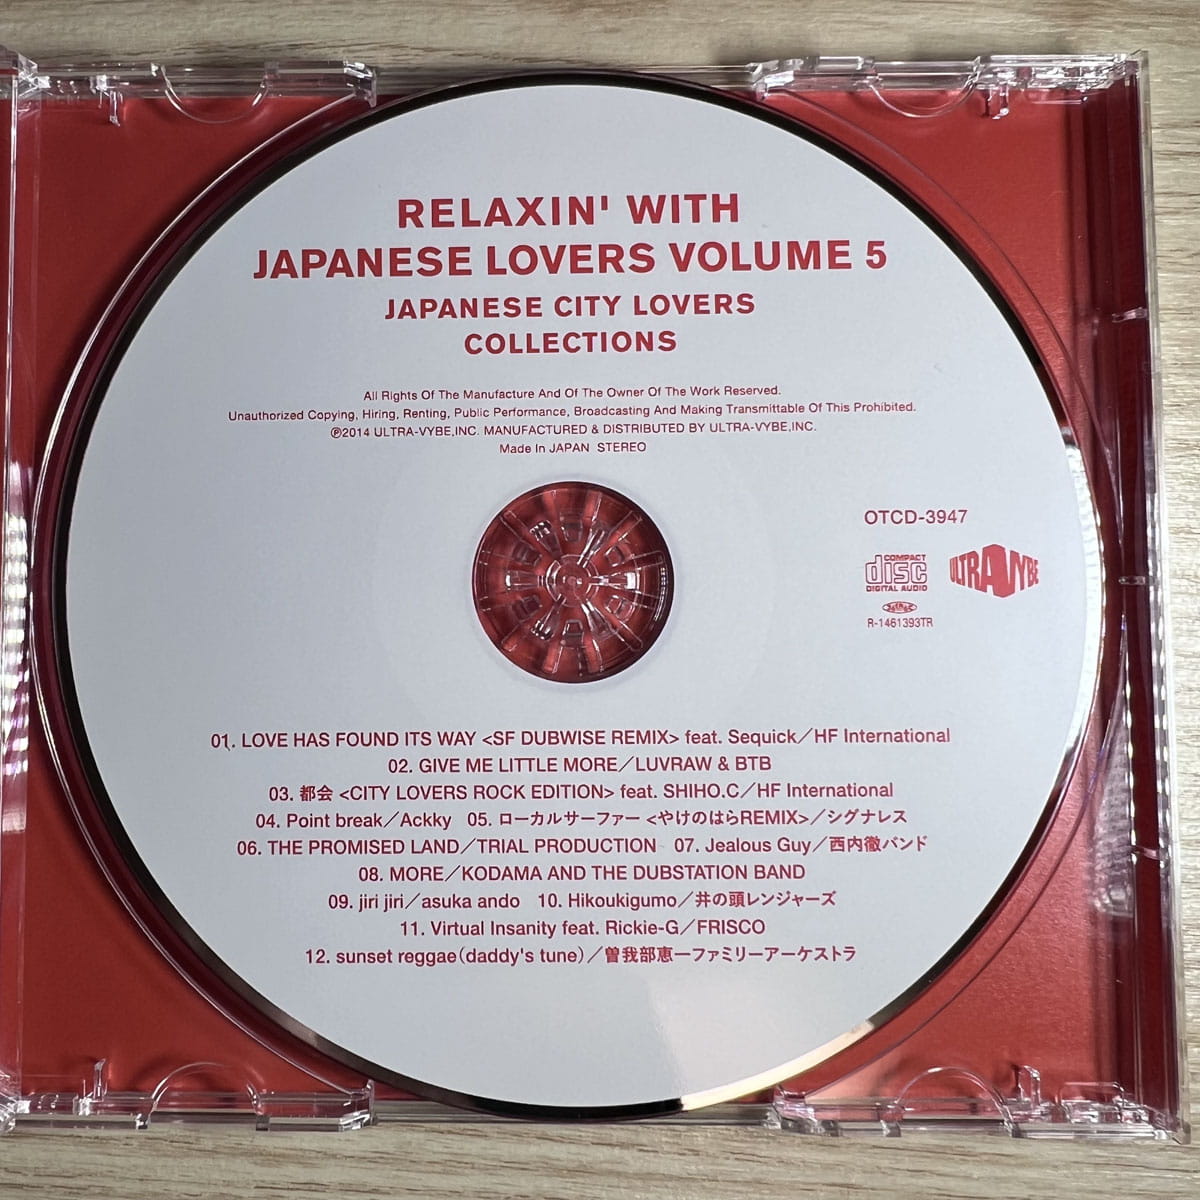 [CD] VA / RELAXIN' WITH JAPANESE LOVERS VOL. 5